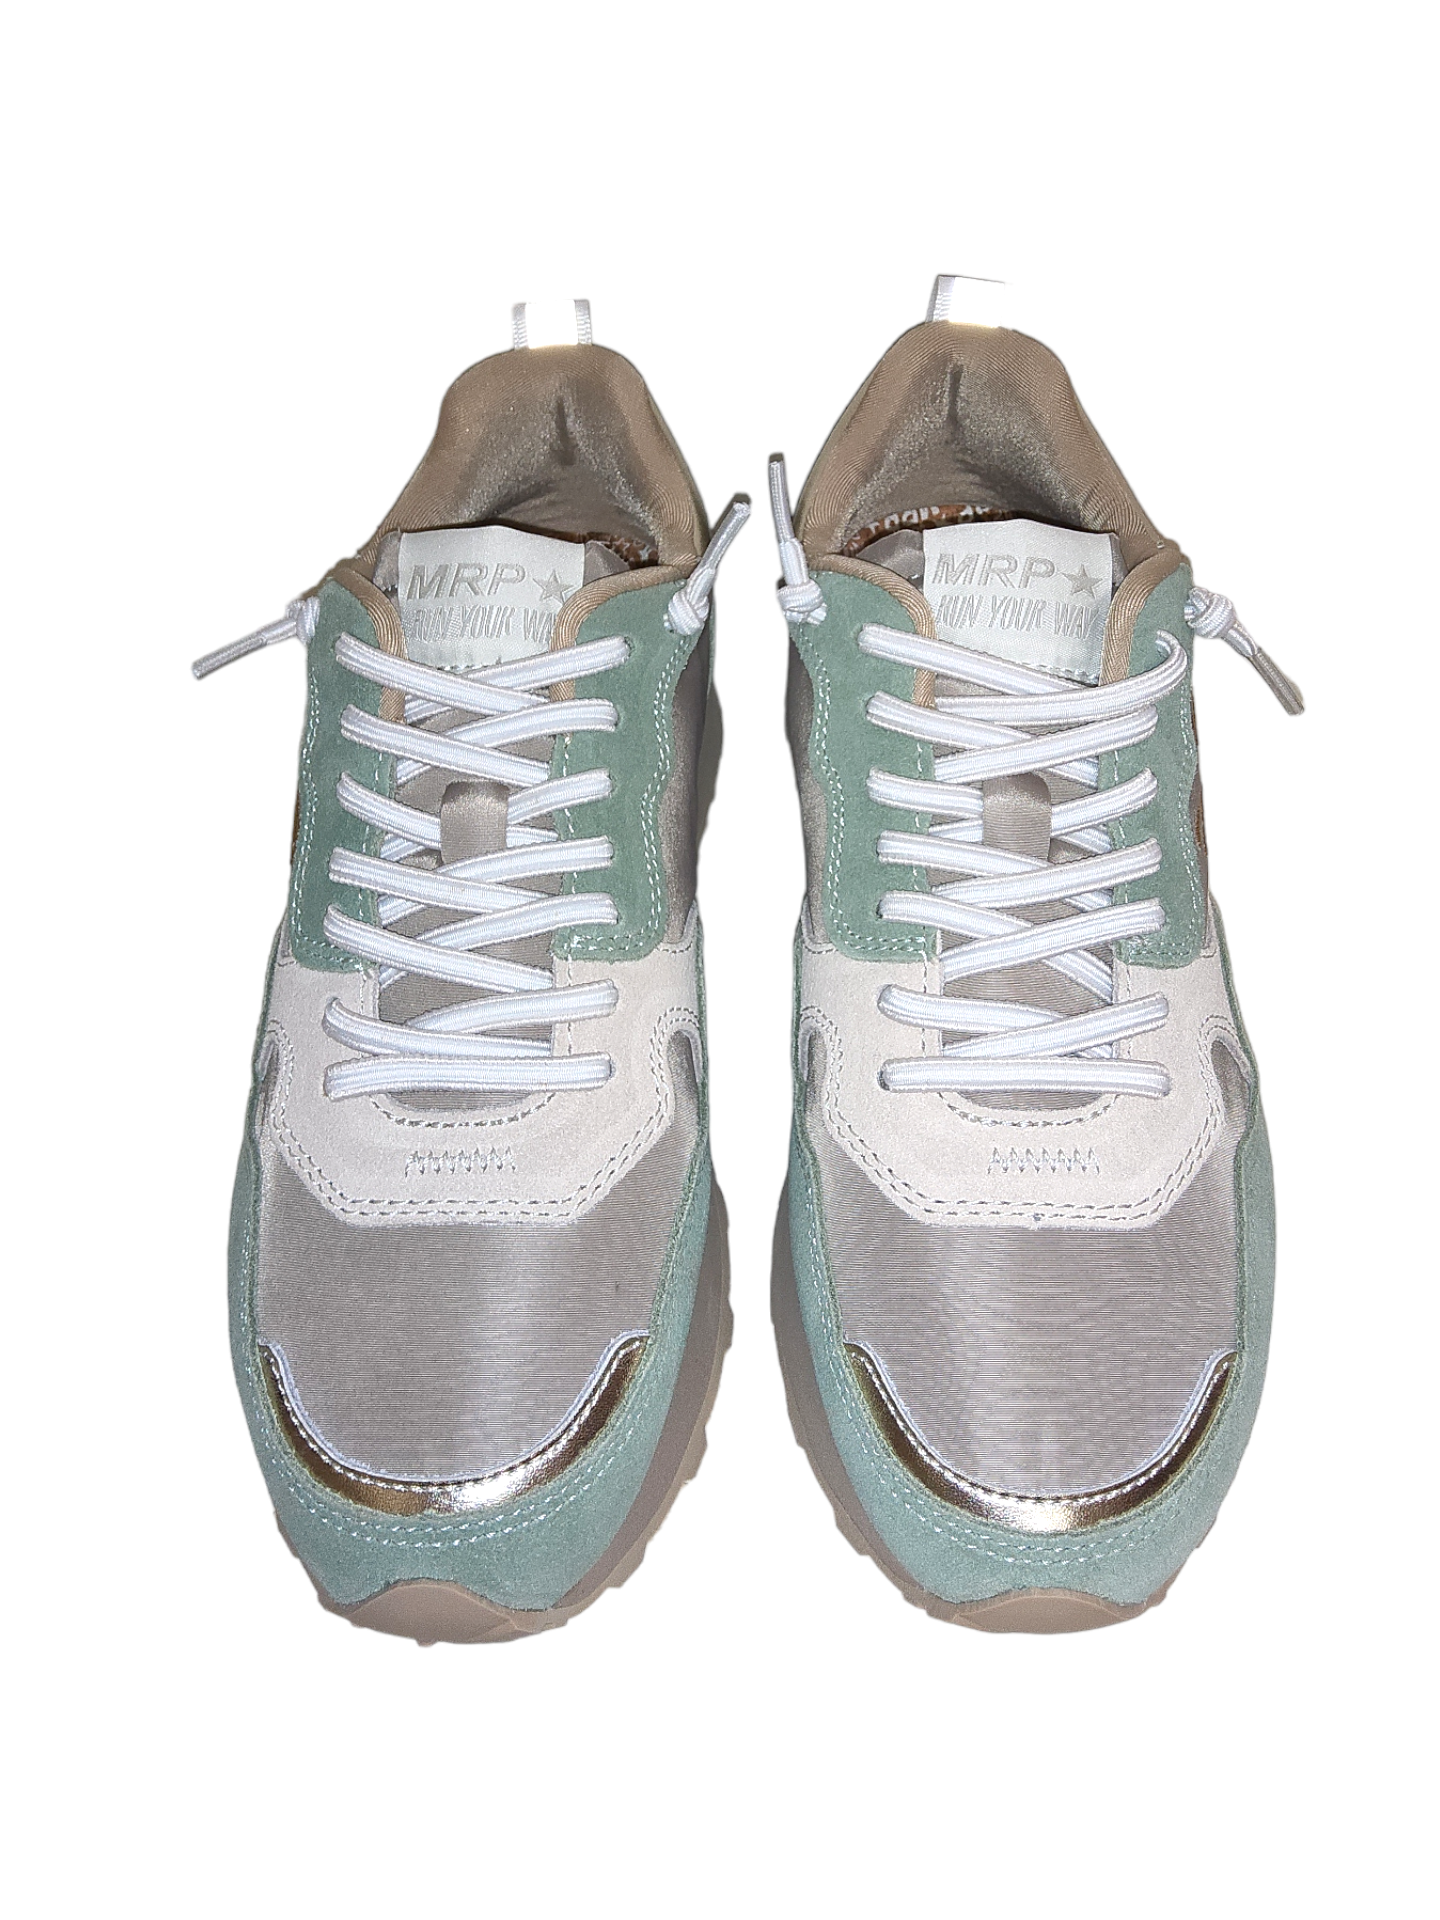 Green and grey sneakers